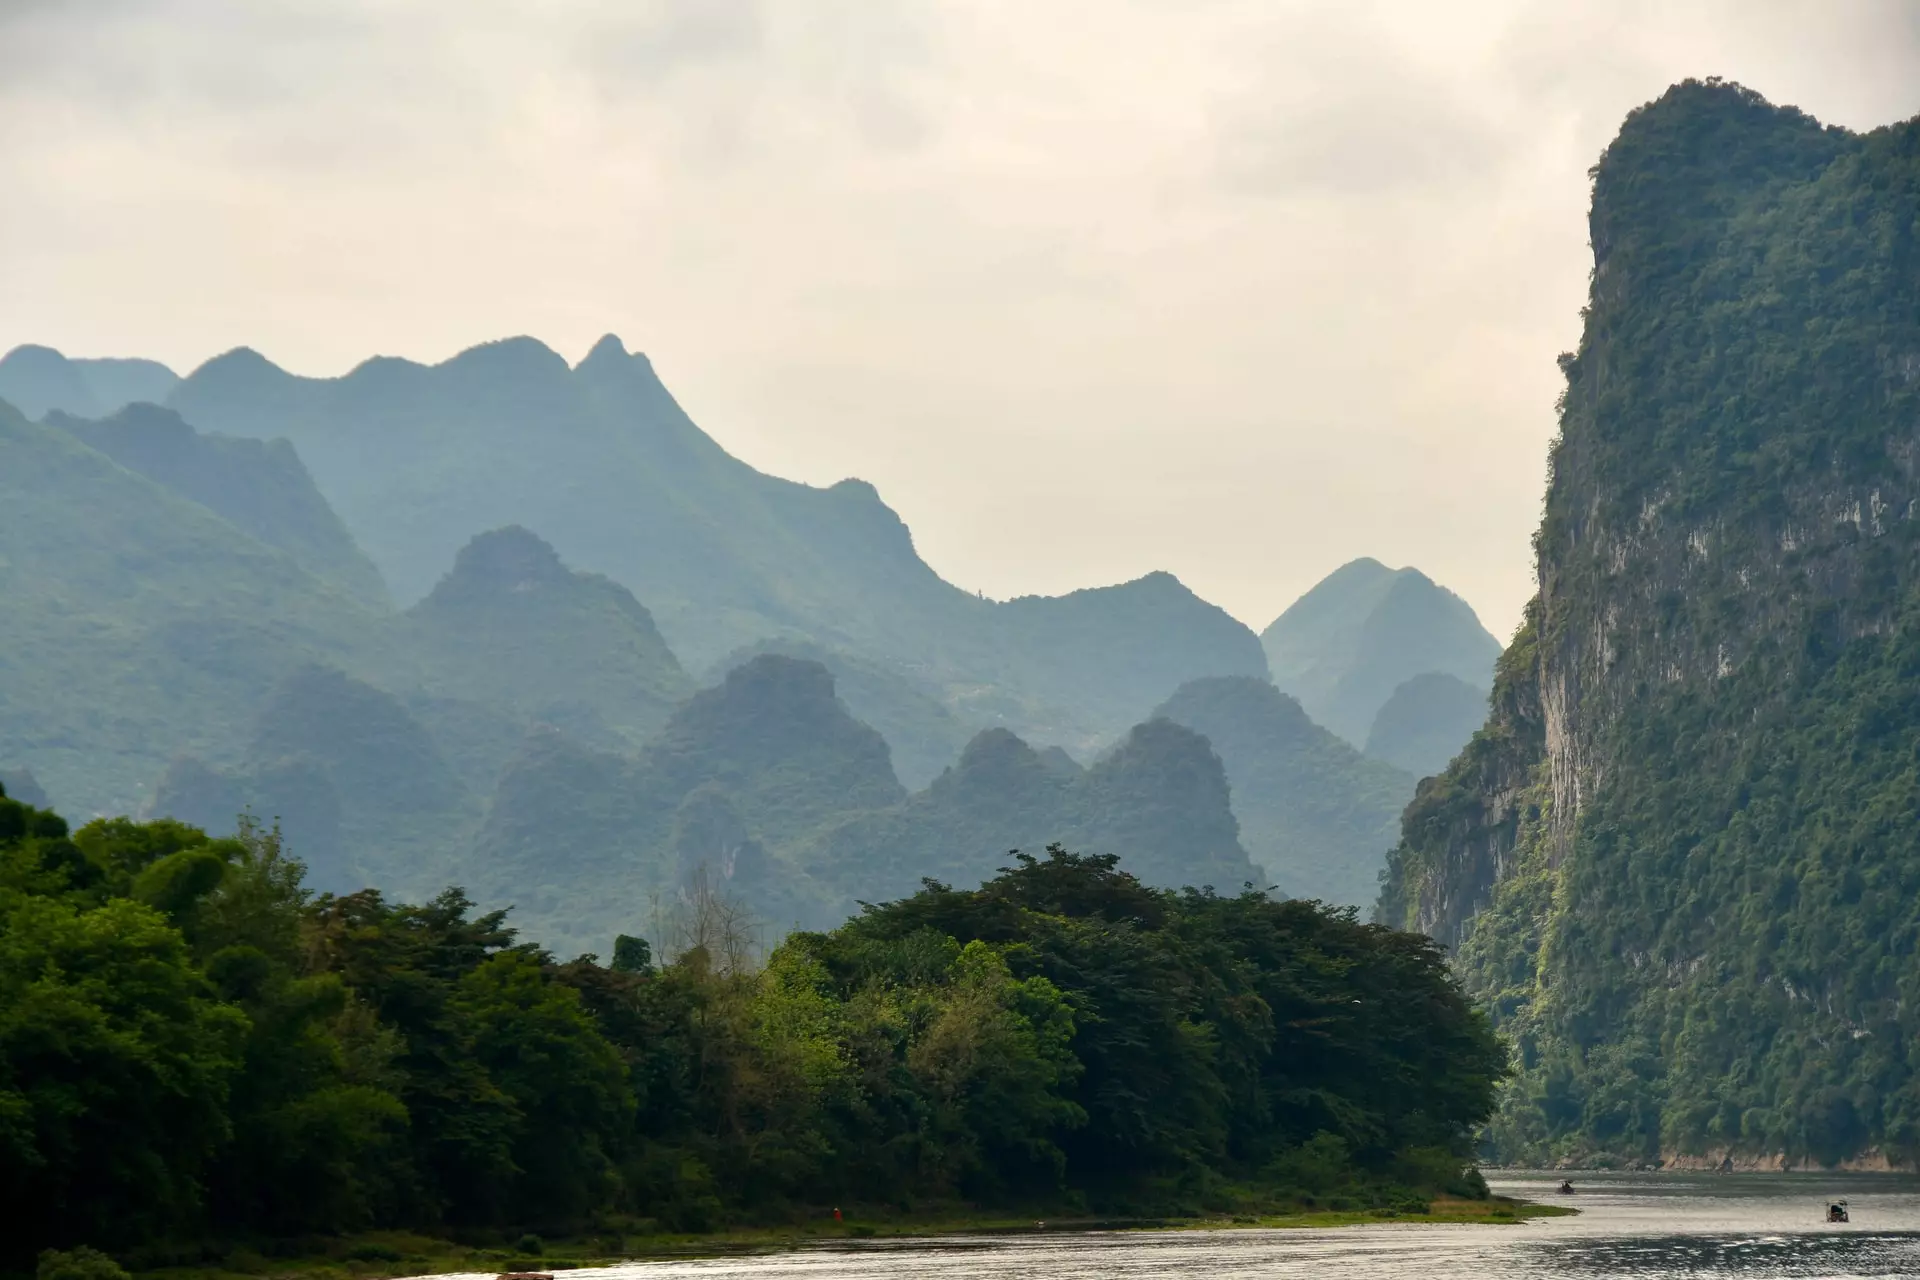 Things to do in Guilin